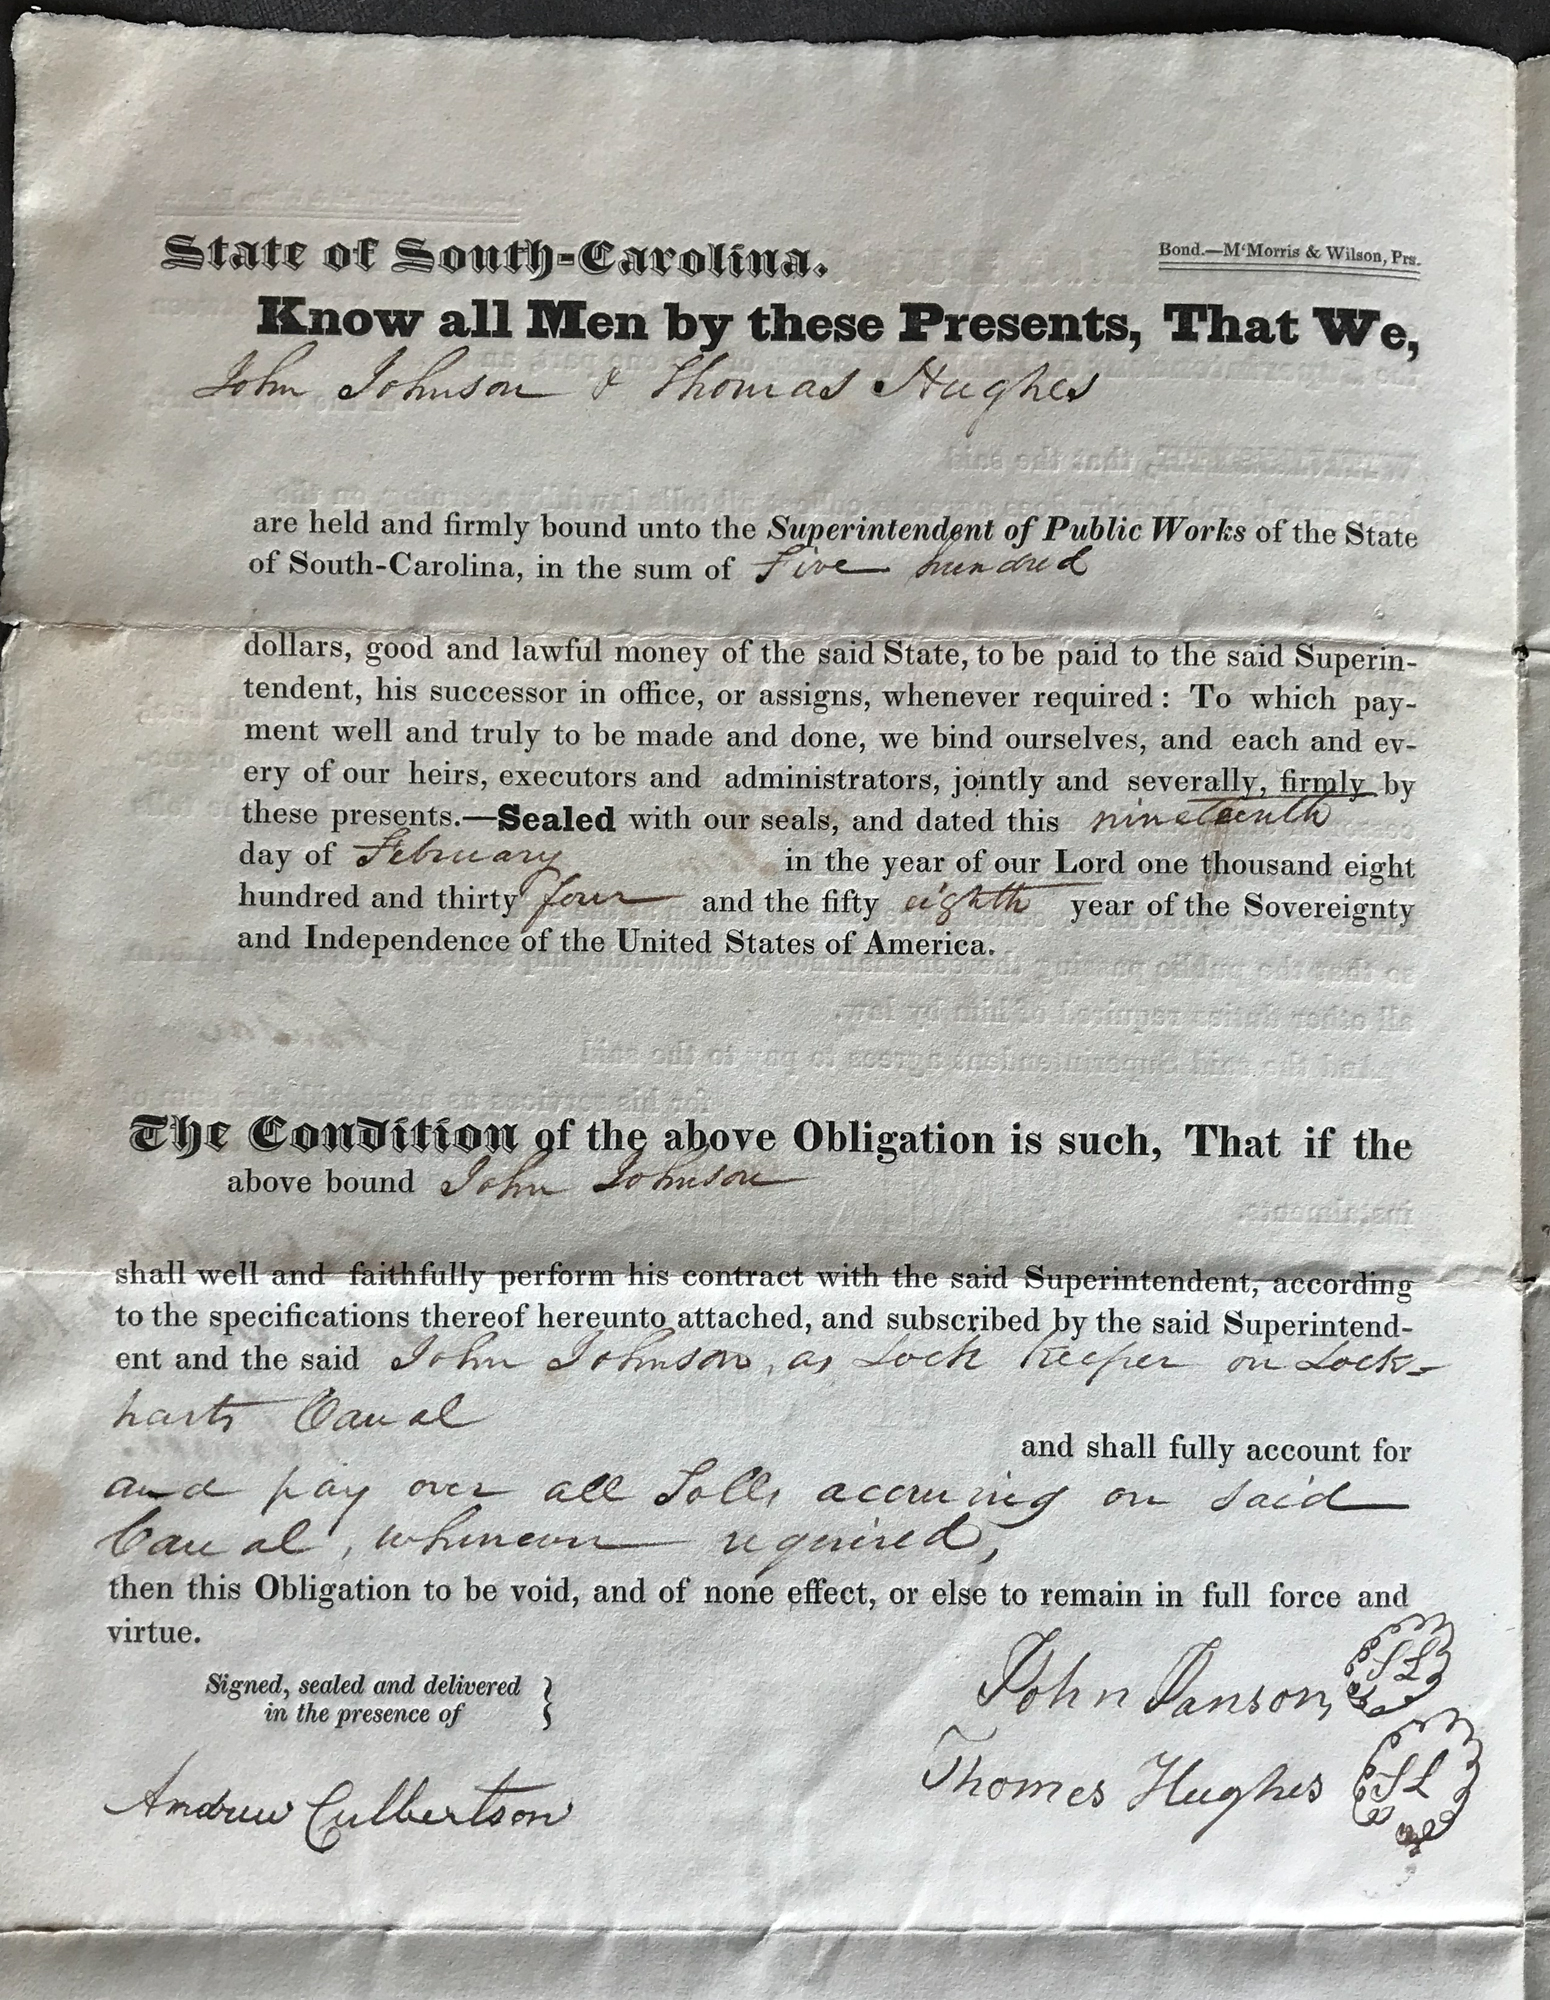 1833 CONTRACT FOR OPERATING THE LOCKHART CANAL, p. 2